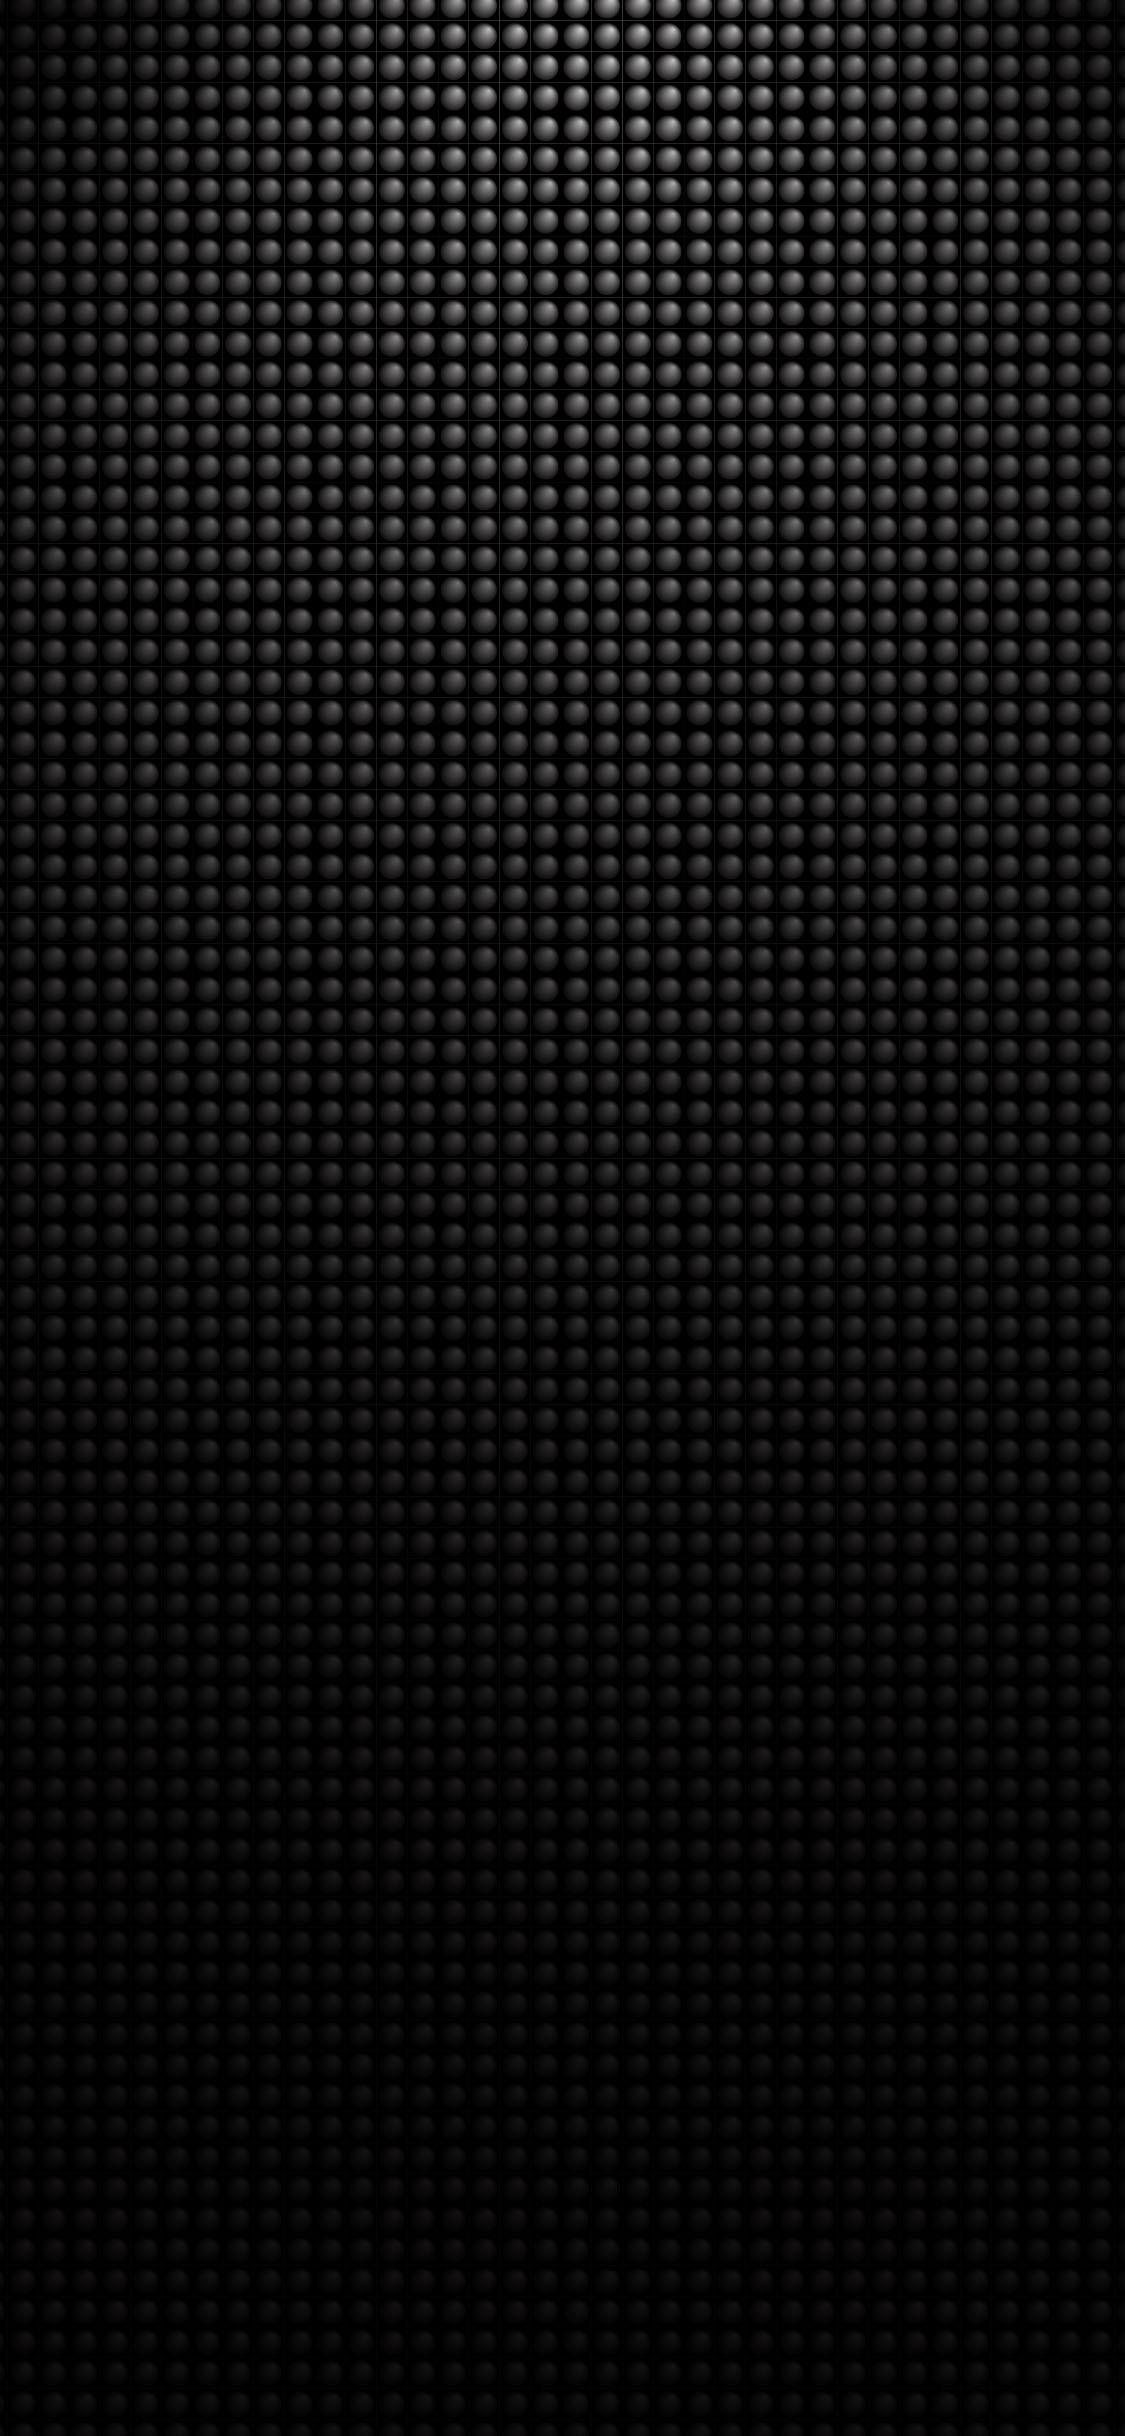 Black Dots - Wallpapers Central